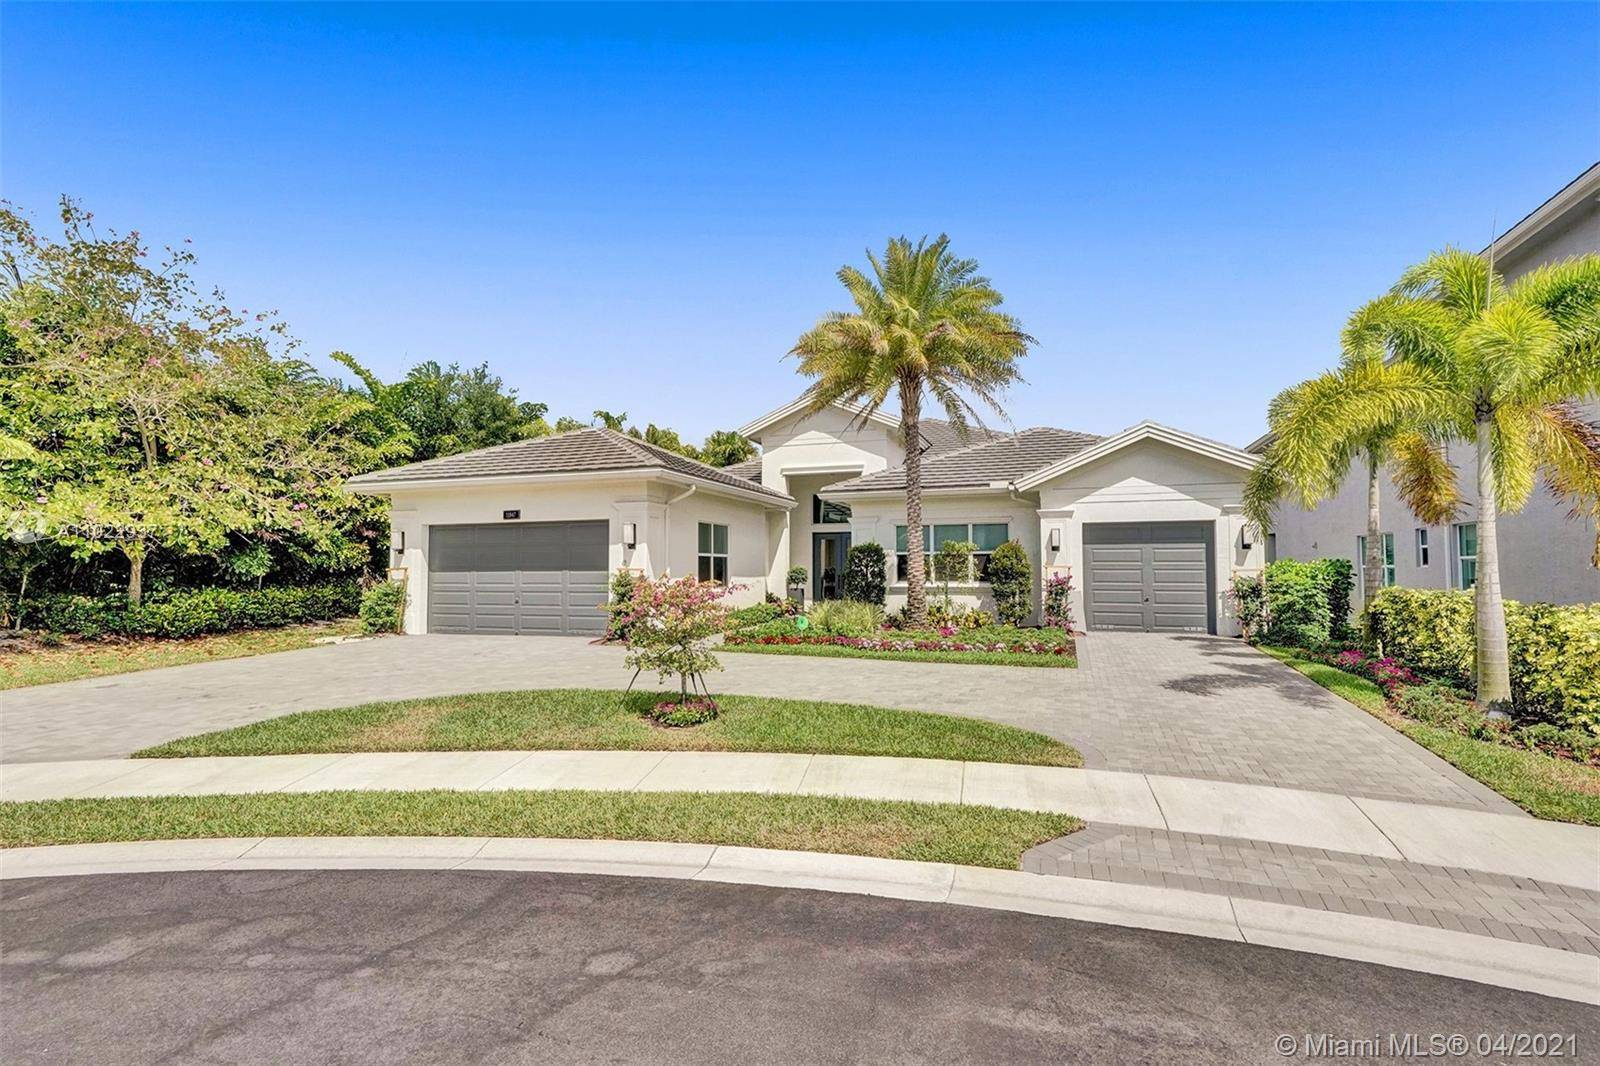 A once in a lifetime opportunity to own this incredible house located in the Berkeley Community in Boca Raton.